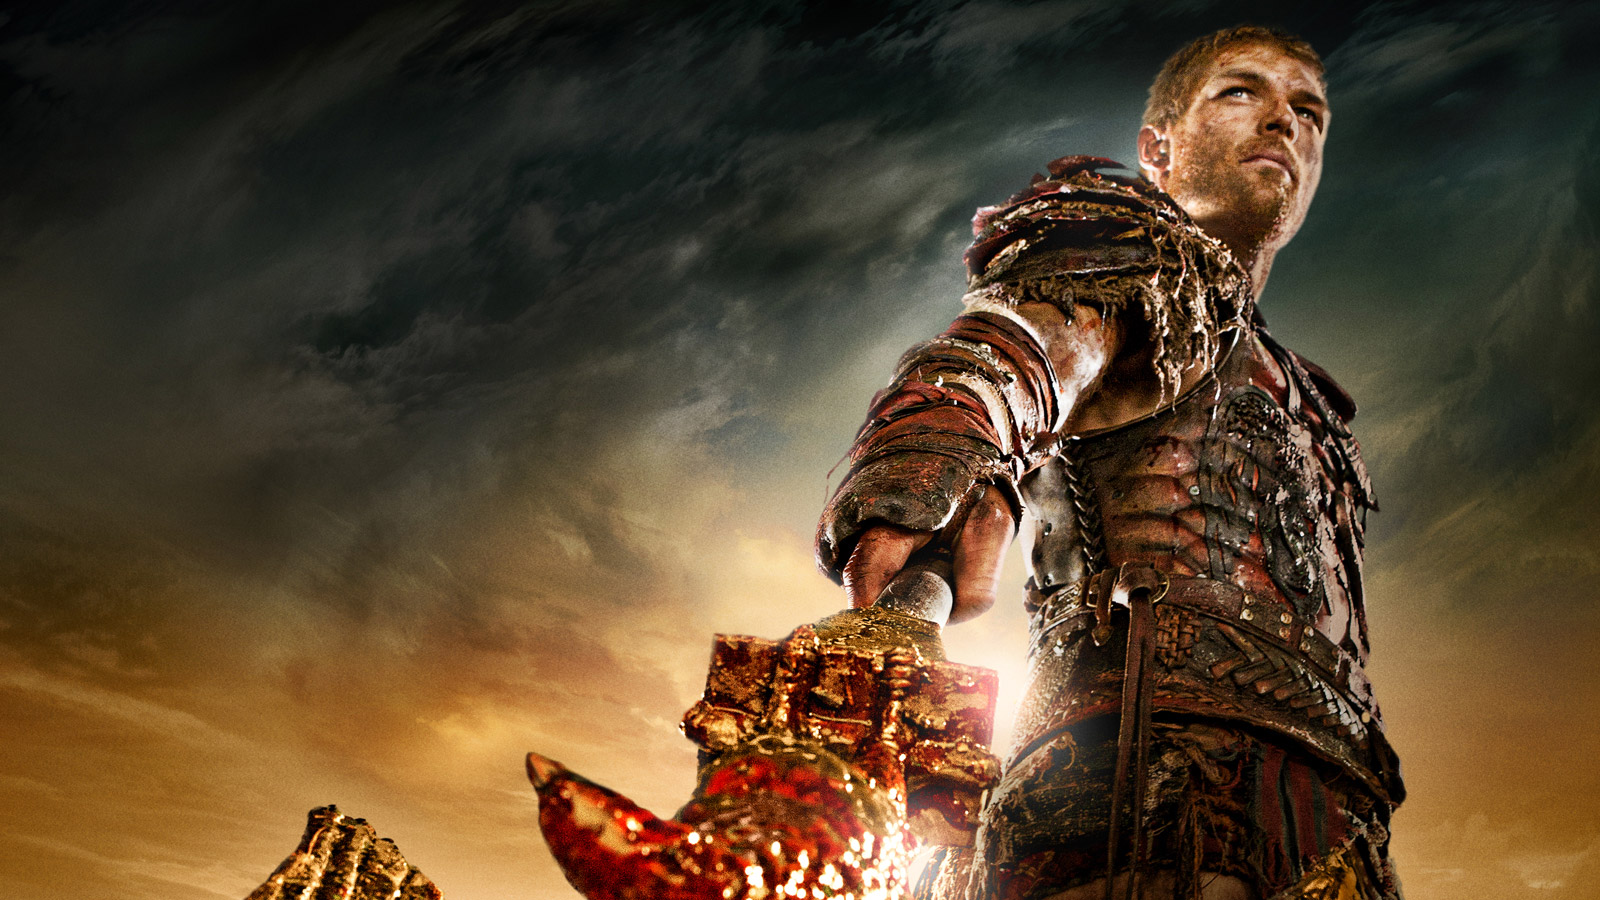 Spartacus - War of the Damned [Imagenes y Wallpapers HD] - Taringa!